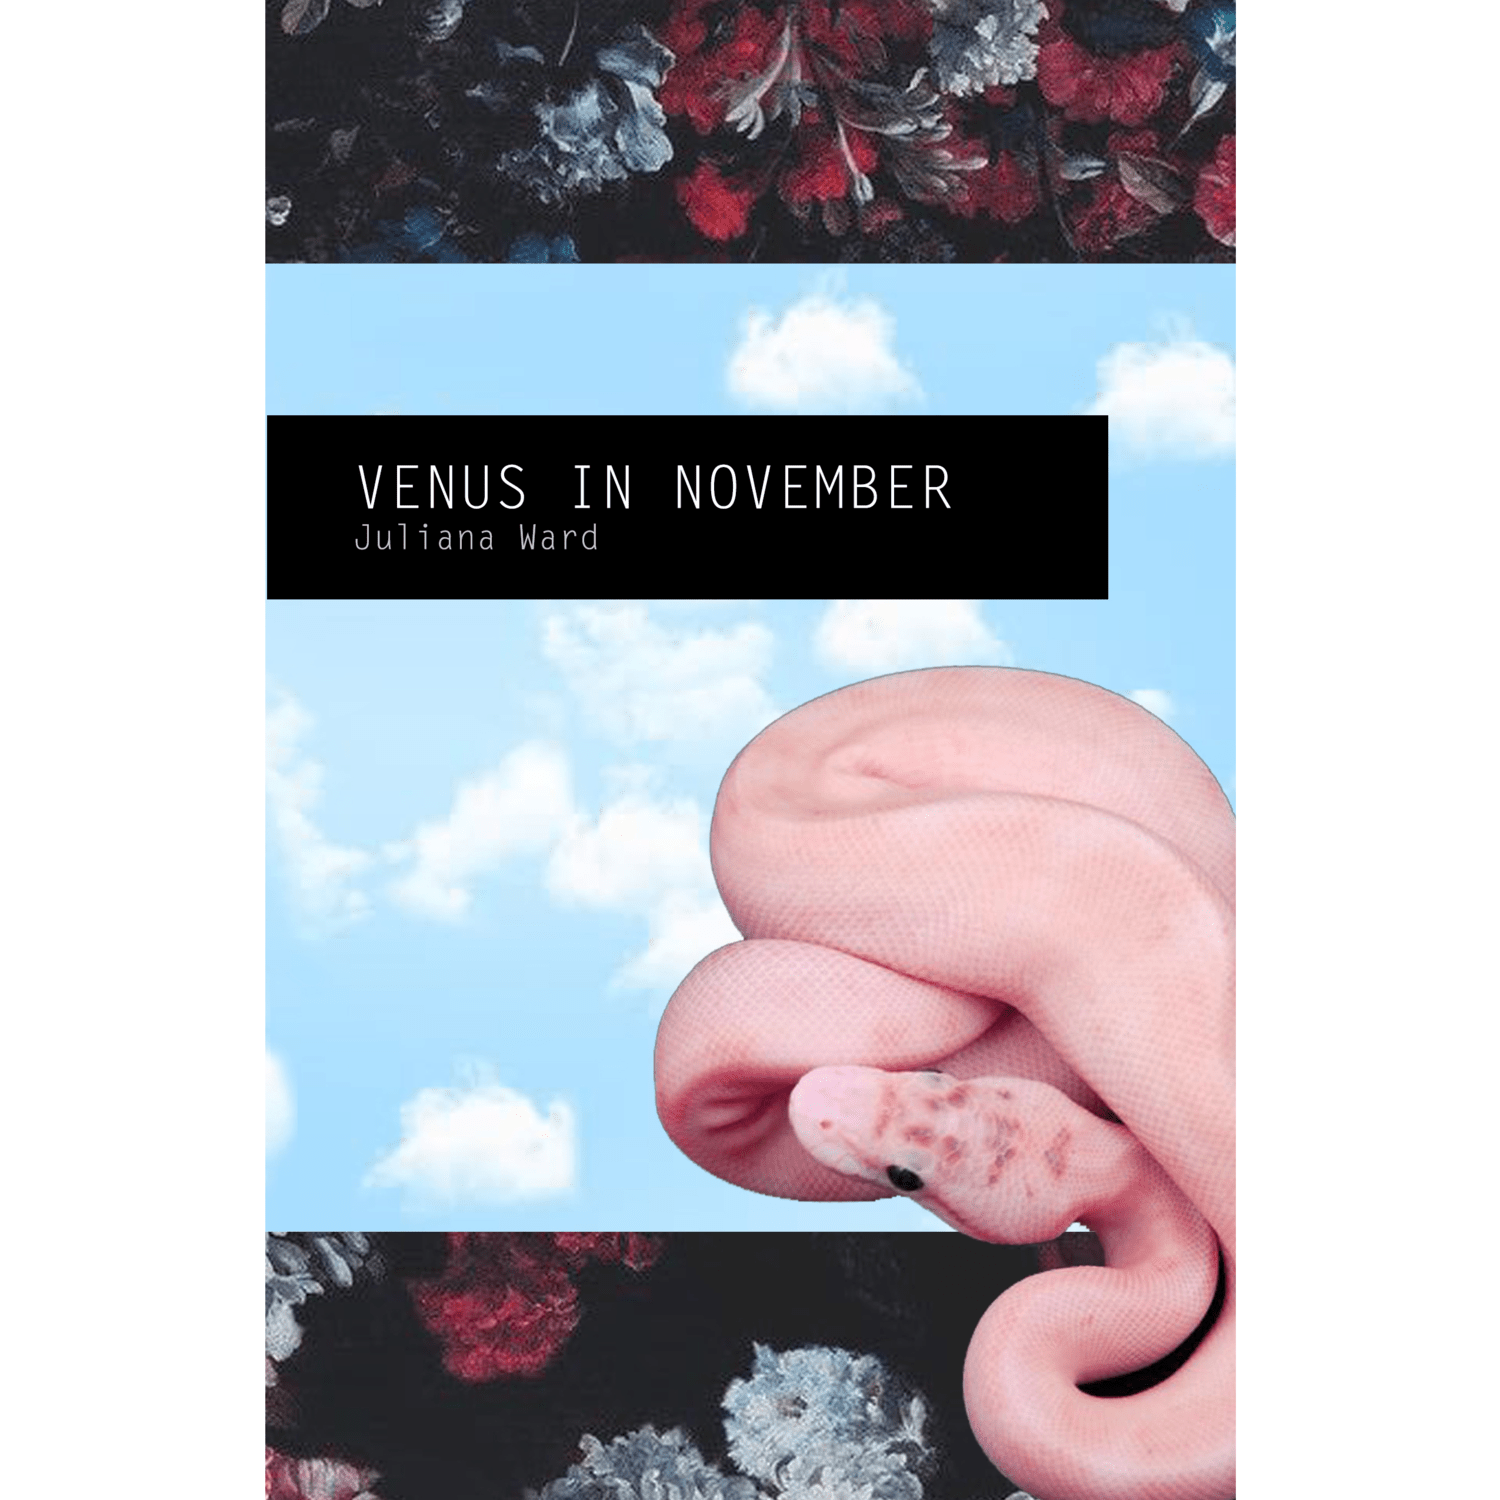 The cover of Venus in November by Juliana Ward. The cover features a blue sky with clouds and red and blue flowers at the top. A pink snake is wrapped around the bottom of the cover. - Venus